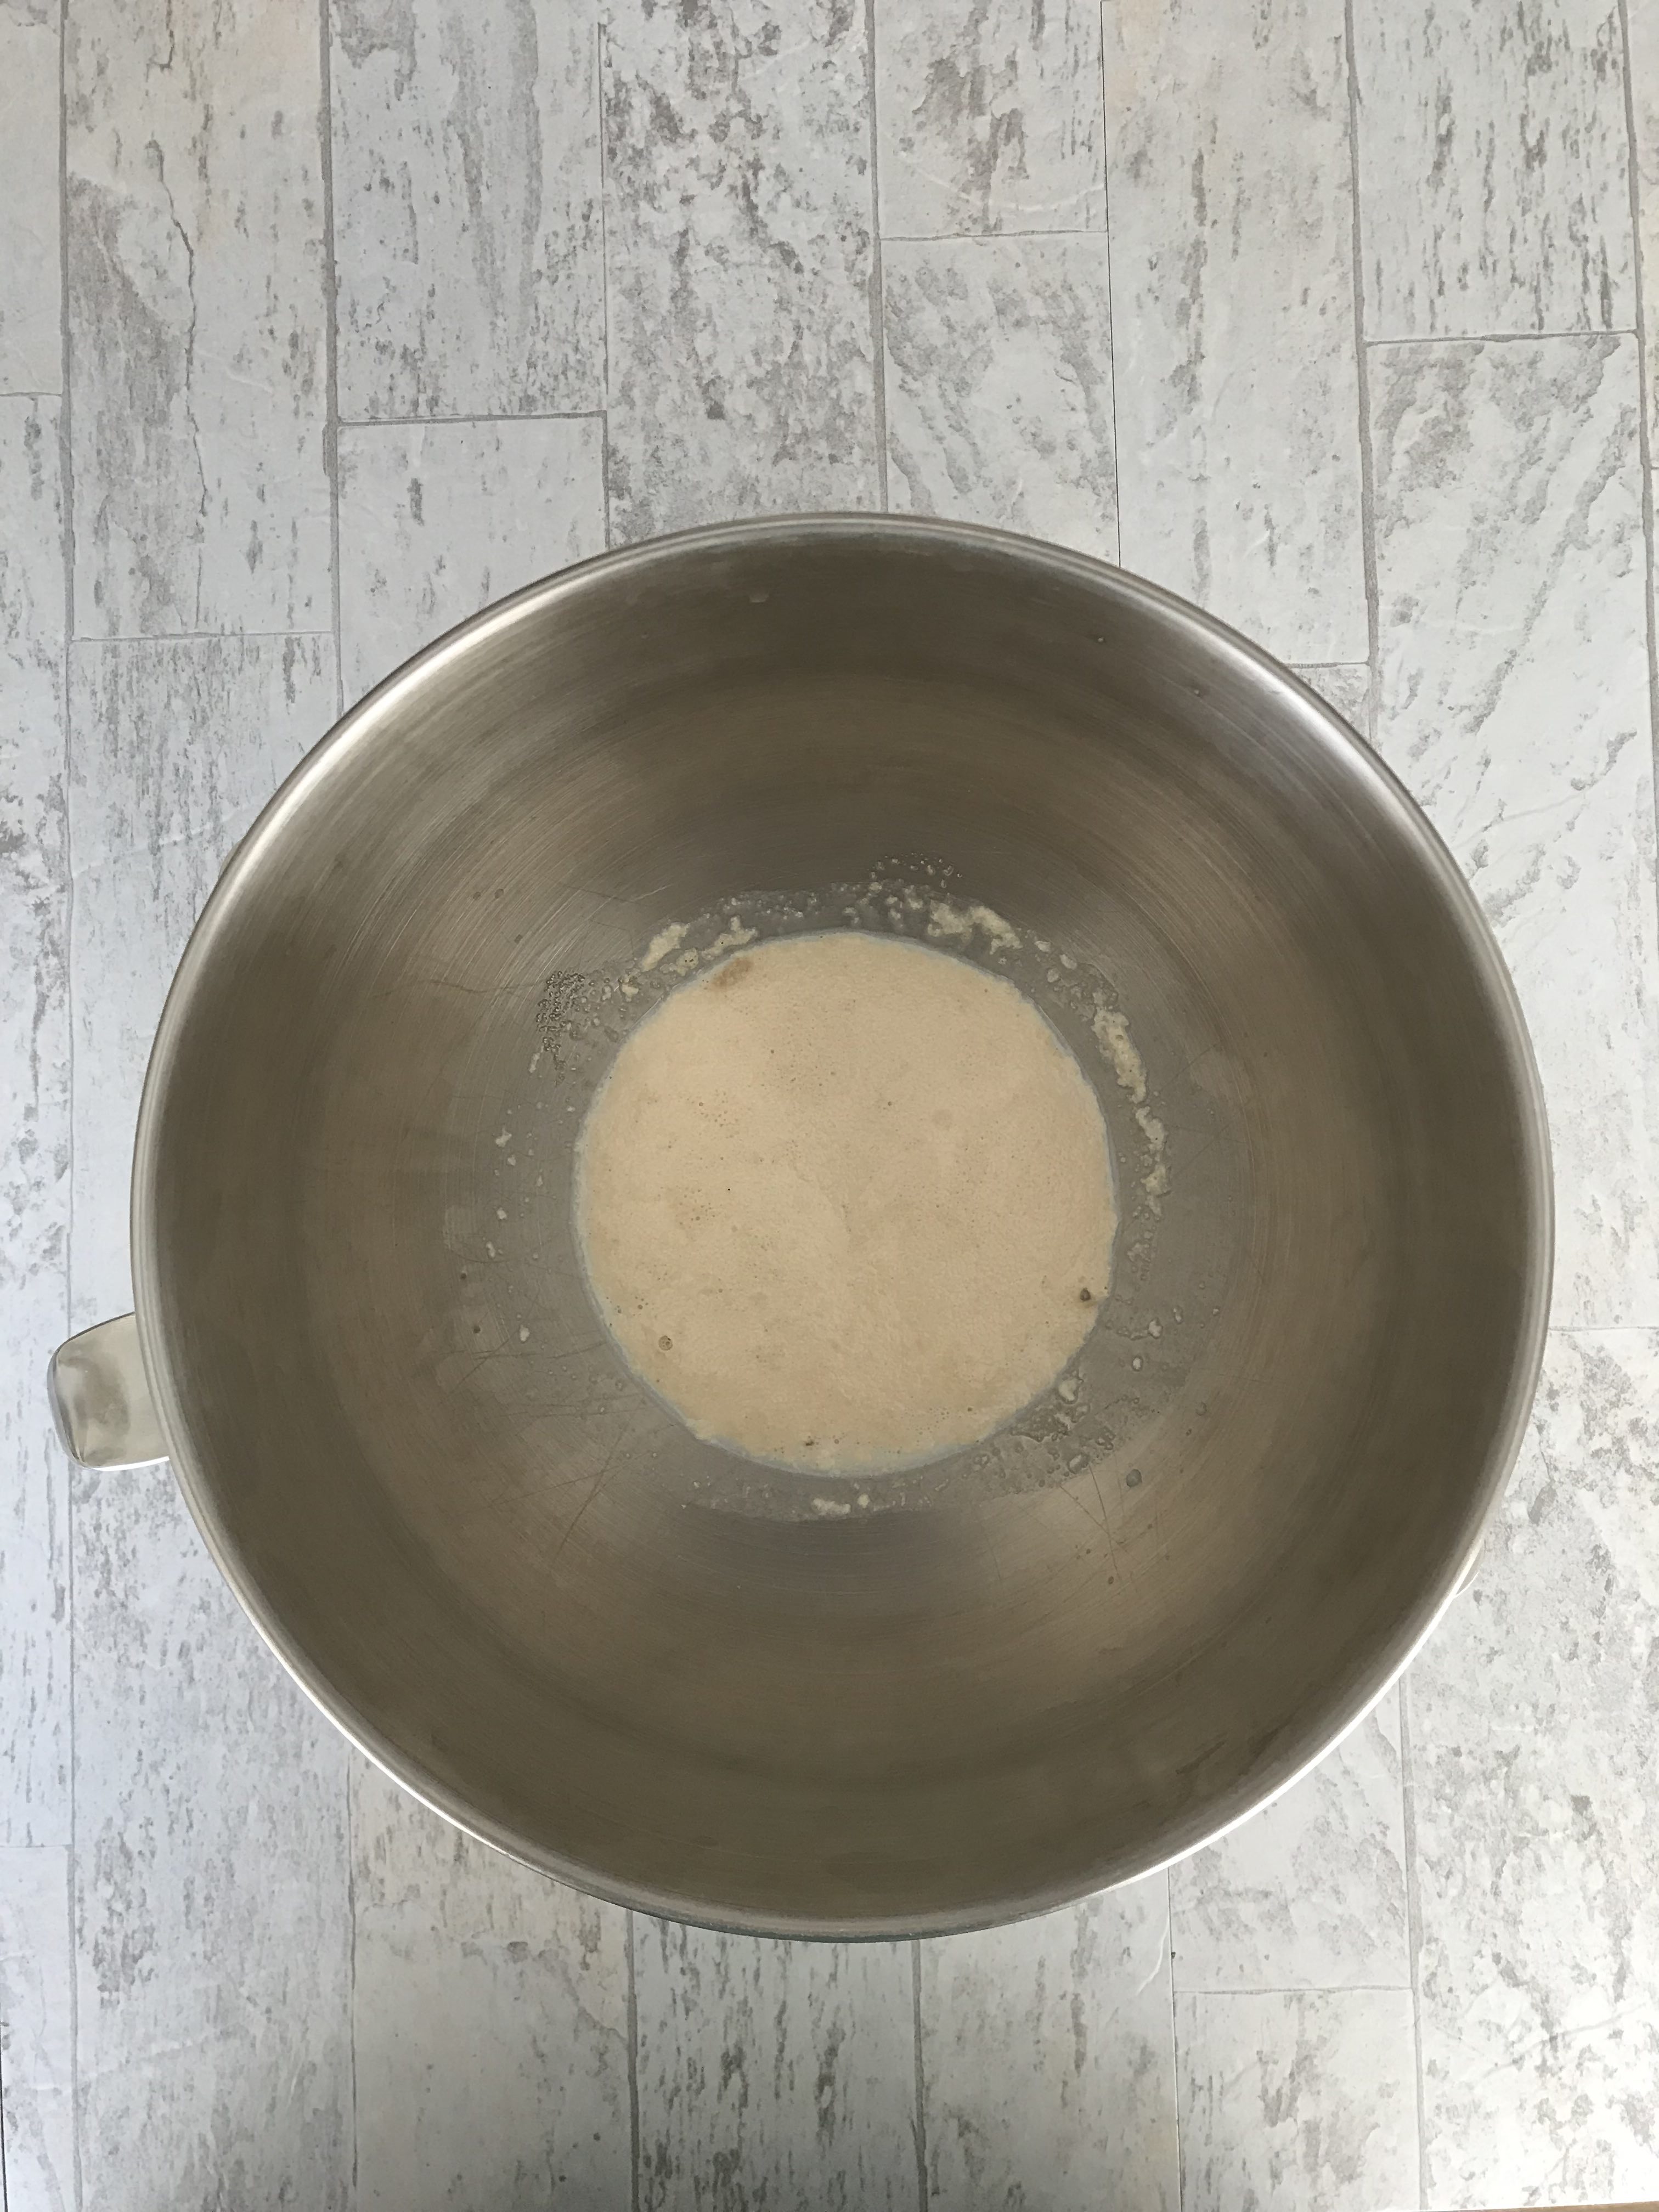 bloomed yeast, milk, and sugar in a bowl